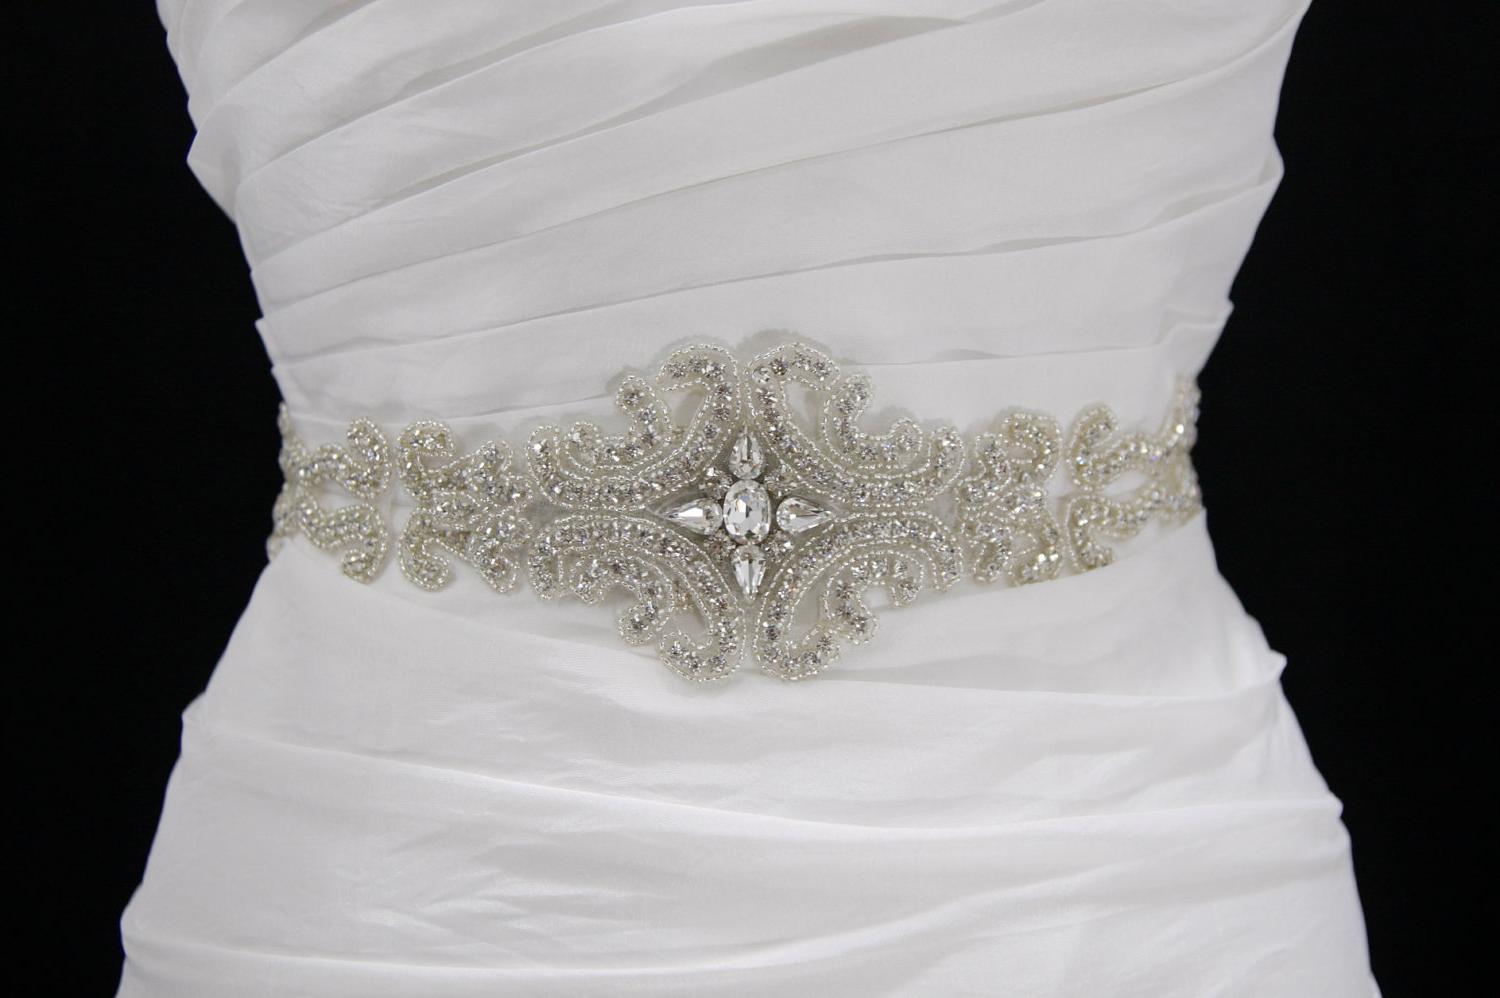 Couture Crystal Bridal Sash. From GlamHouse